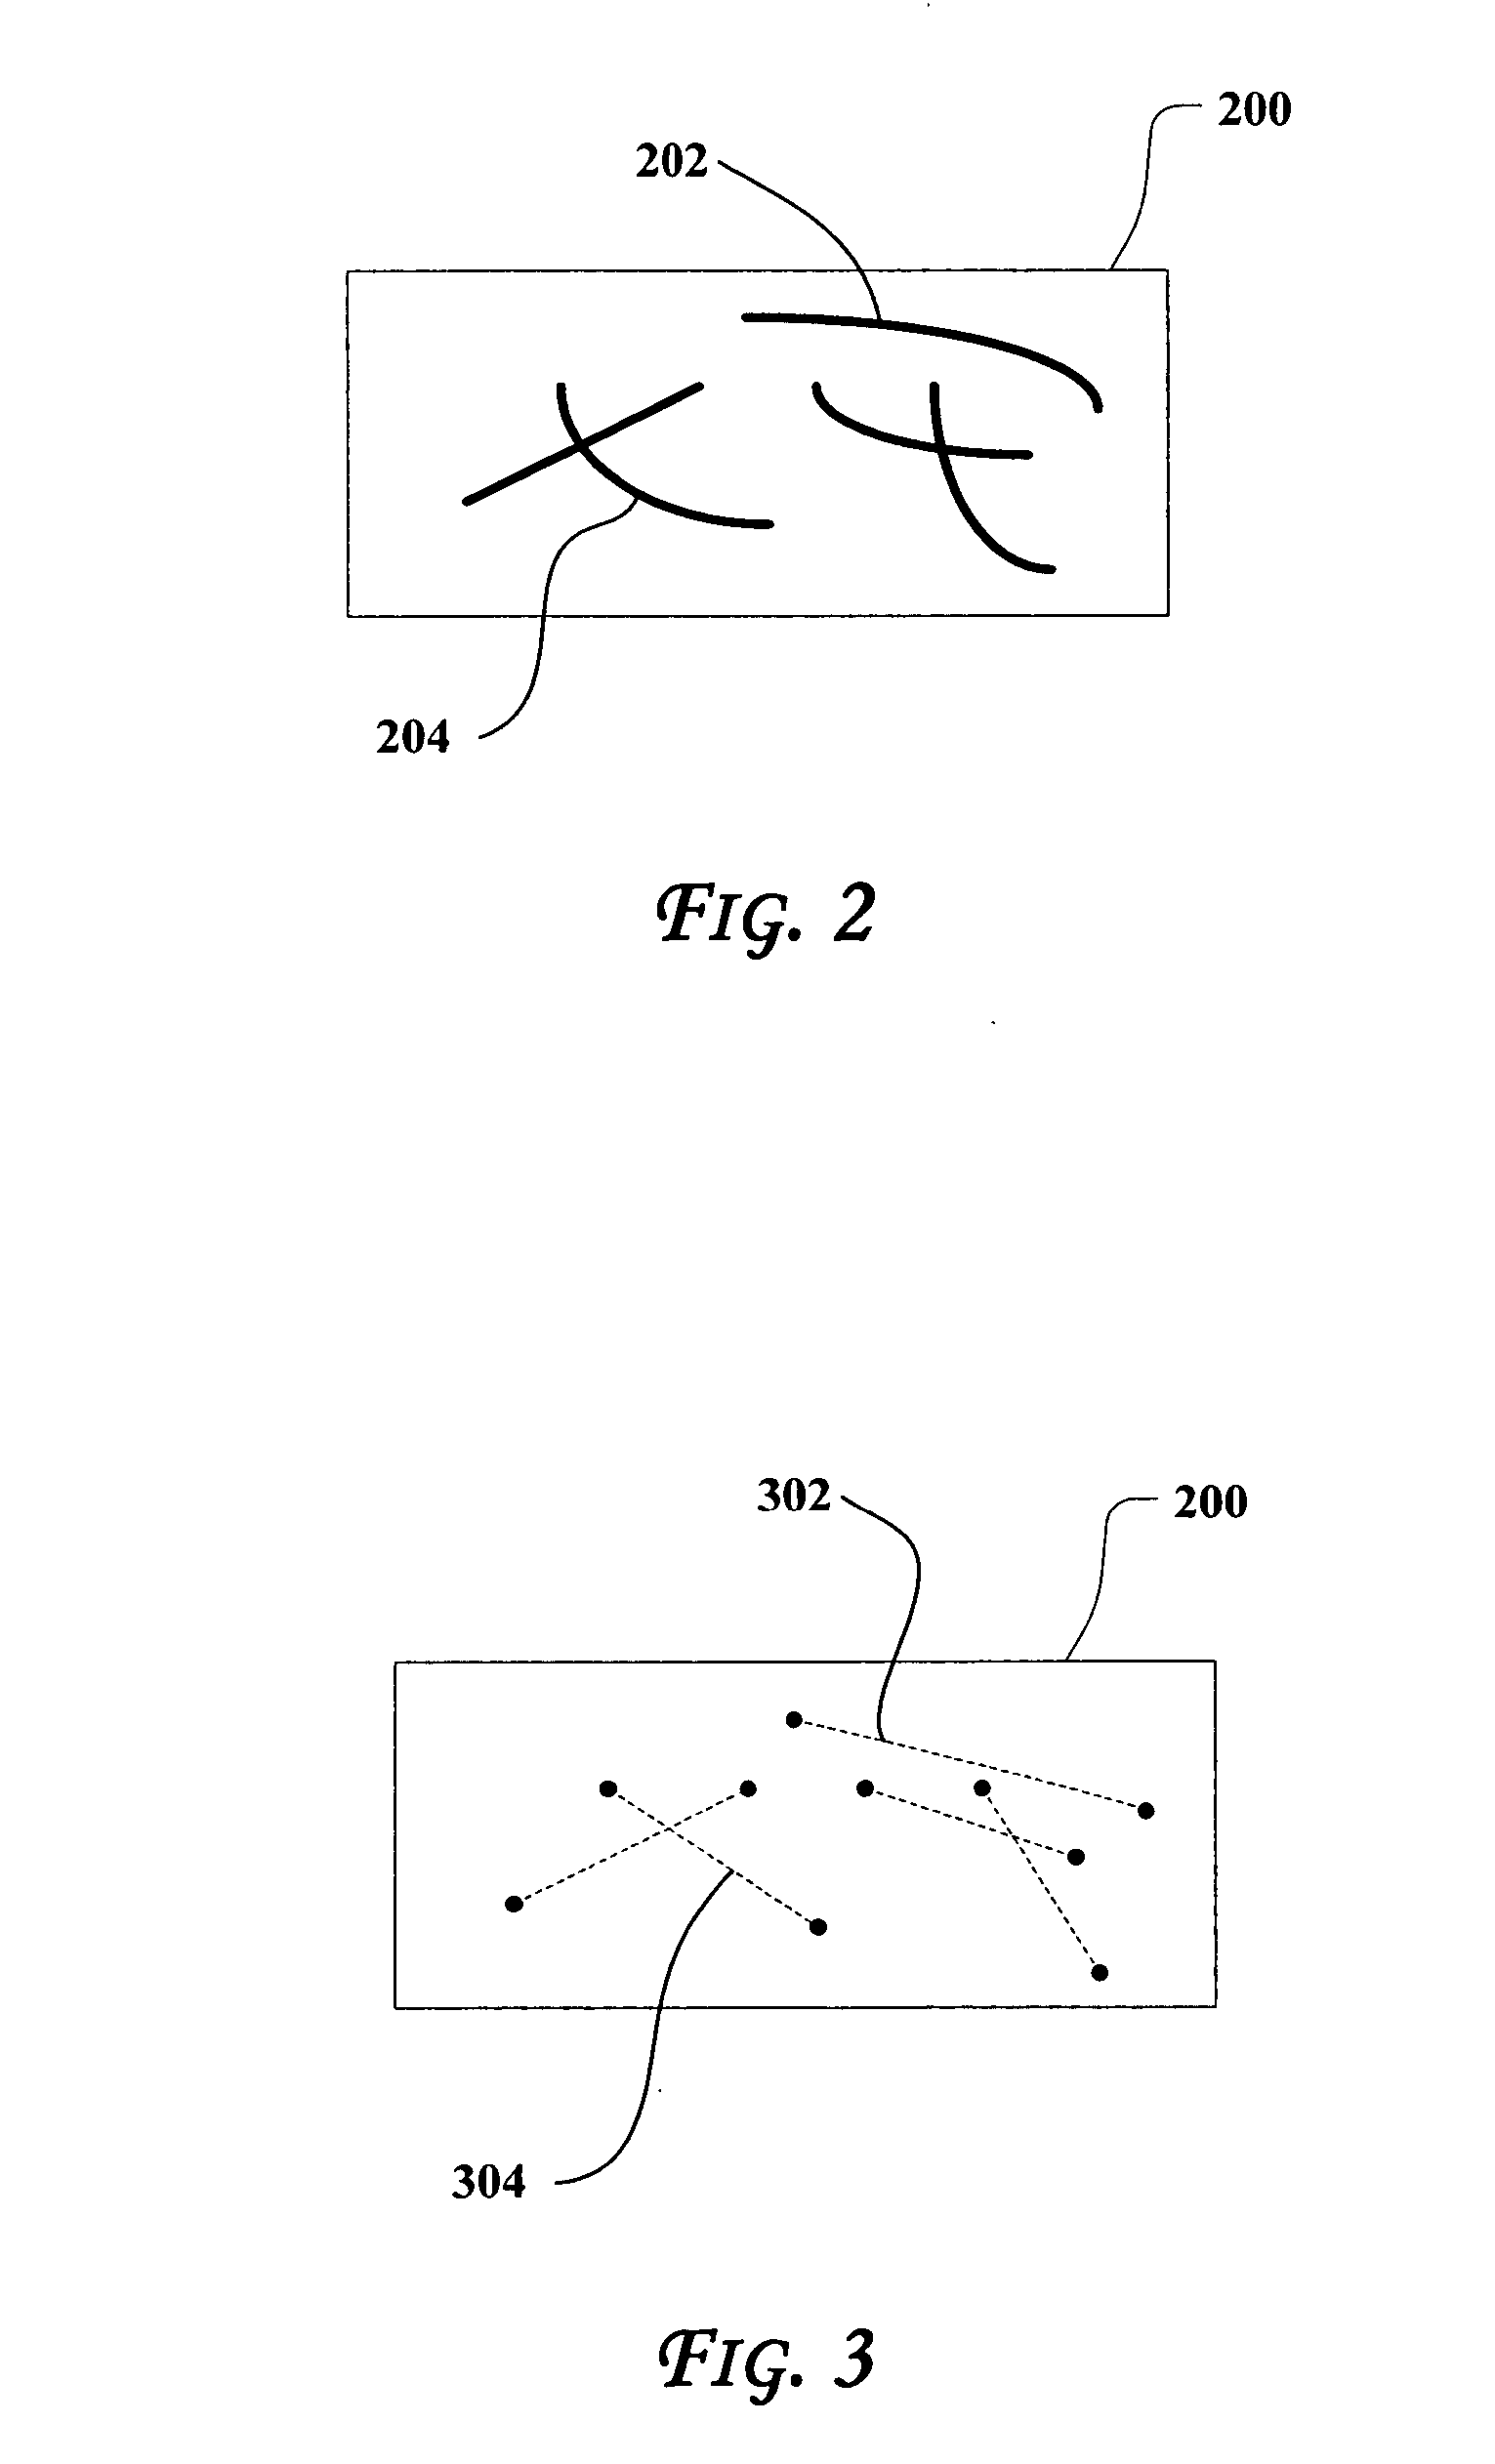 Counterfeit and tamper resistant labels with randomly occurring features